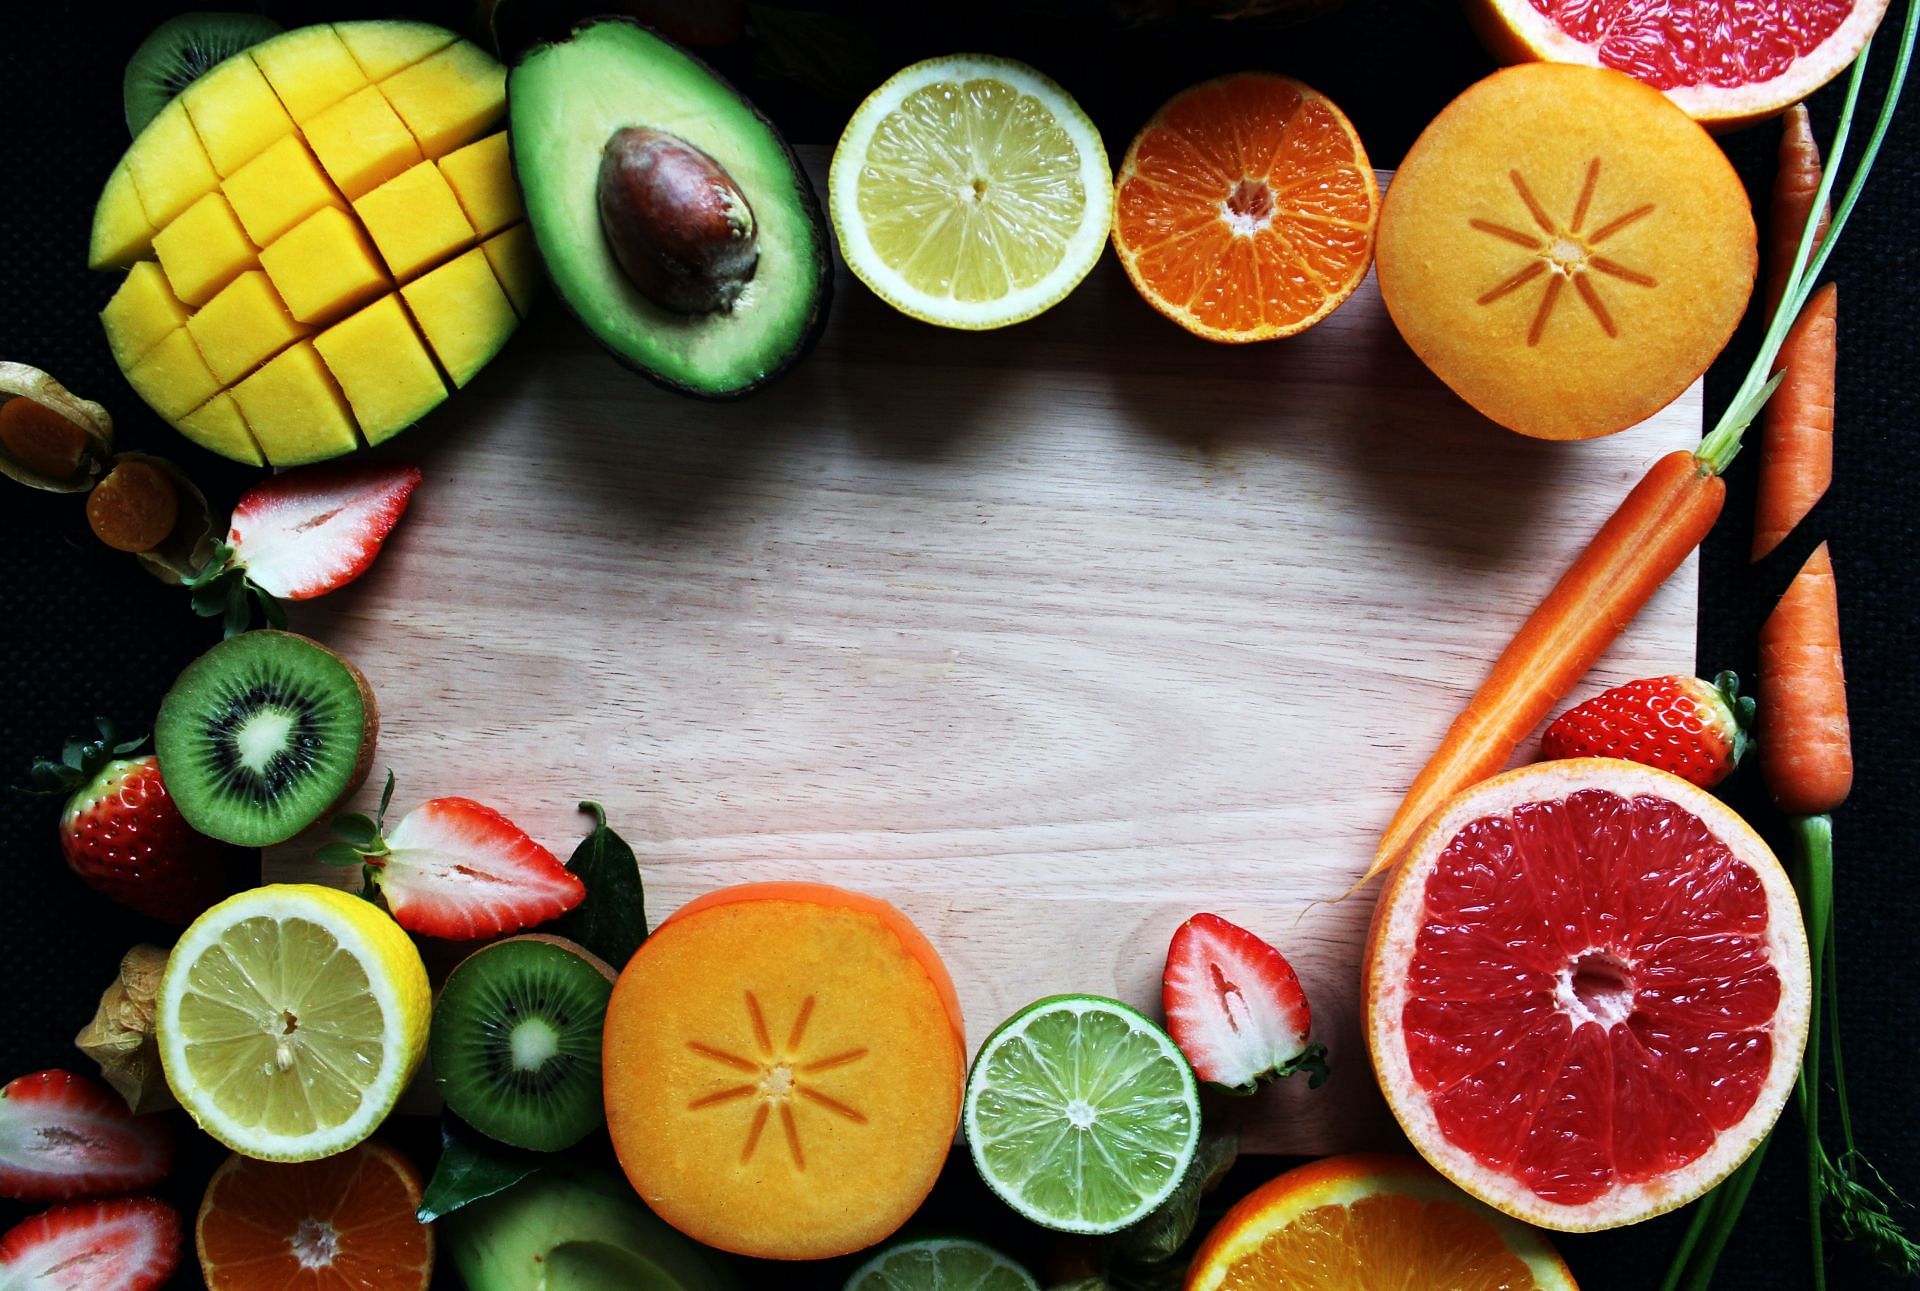 What fruits help with constipation and digestion? (Image via Unsplash/Amoon Ra)